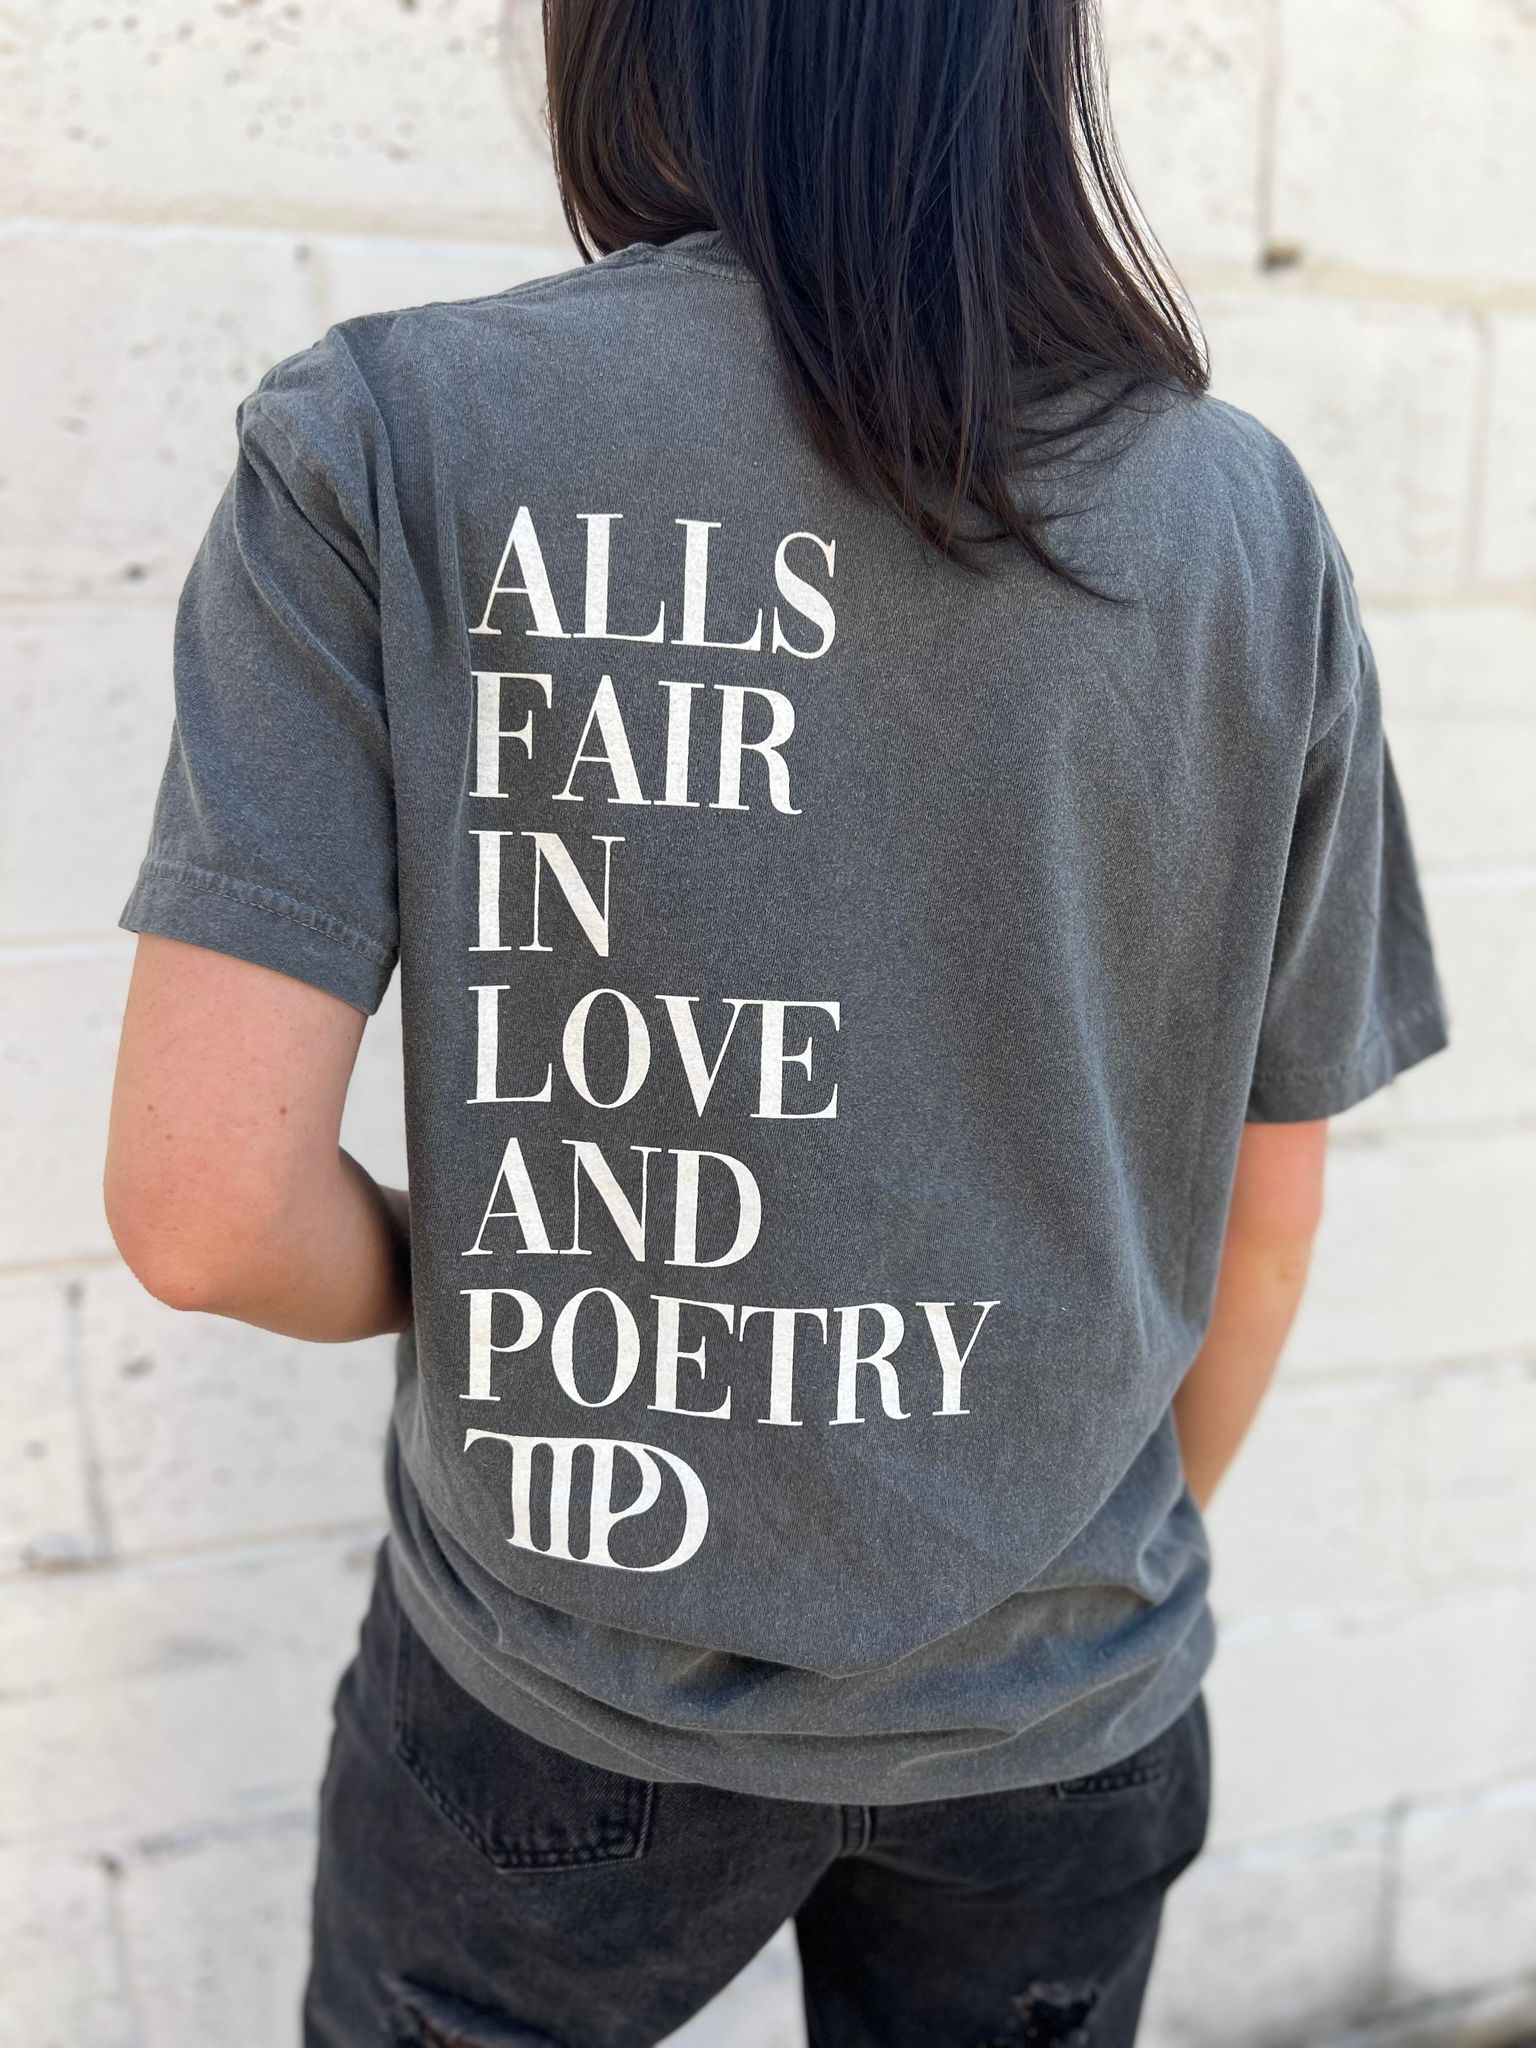 All's Fair in Love and Poetry Tee- ASK Apparel LLC